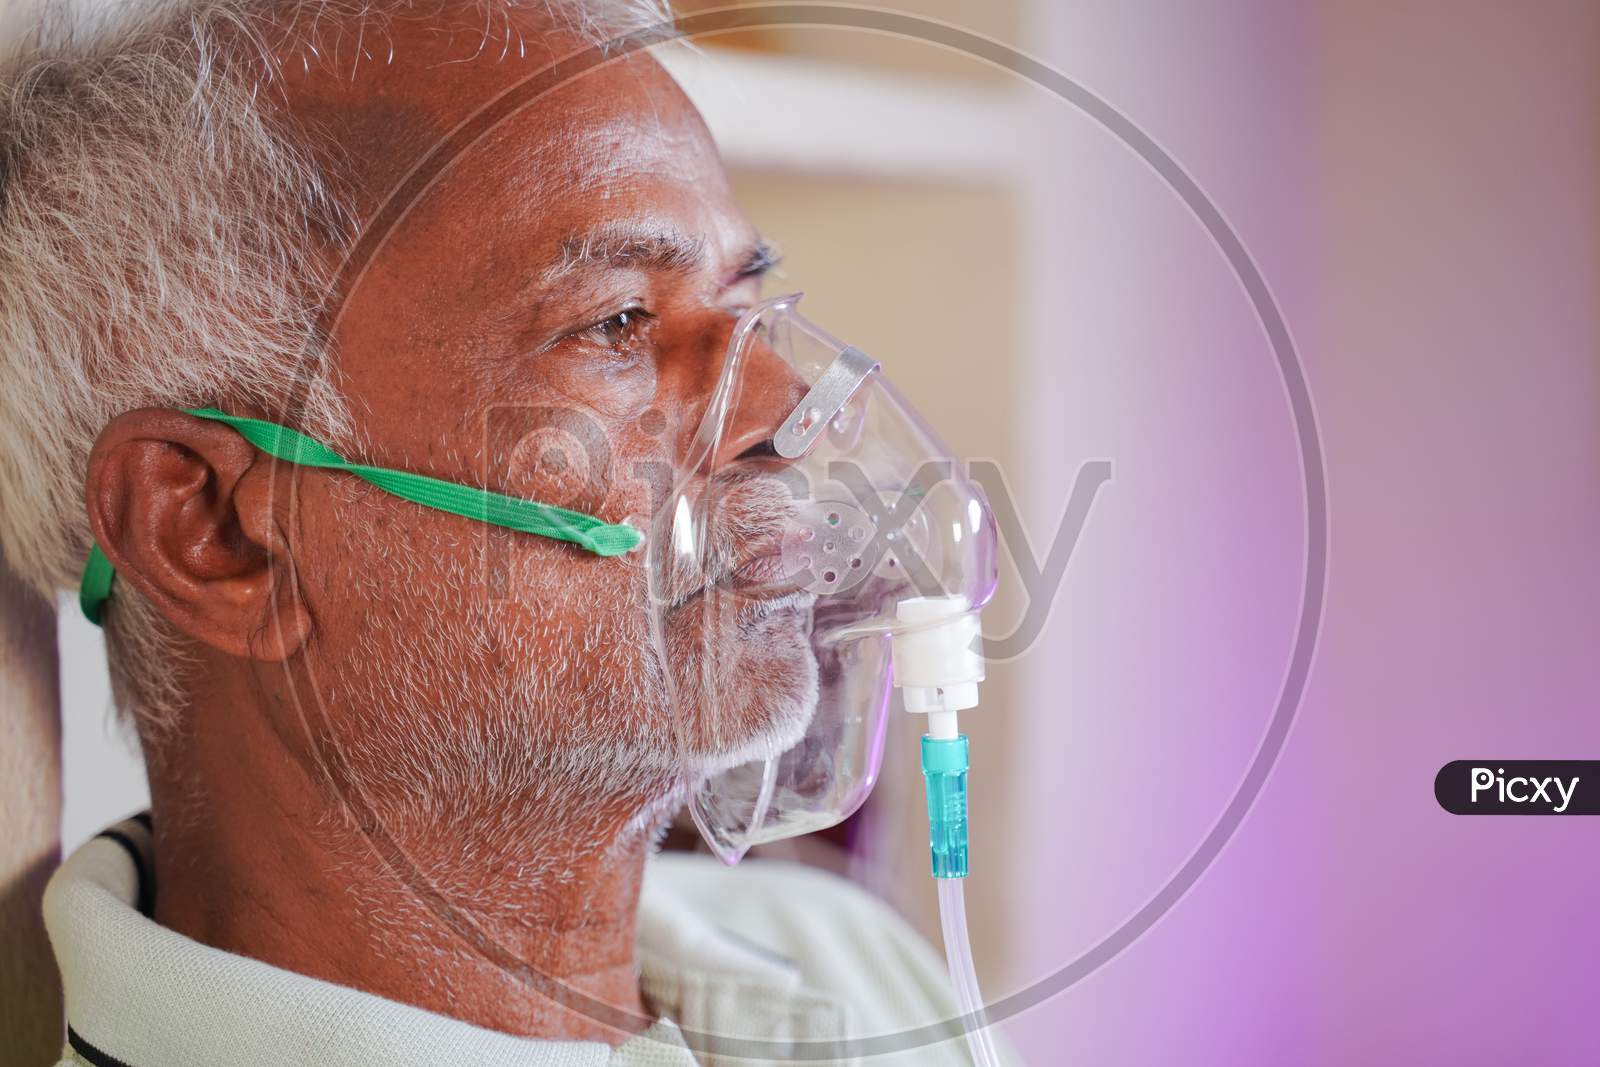 Close Up Head Shot Of Old Man Breathing On Ventilator Oxygen Mask At Home Due To Coronavirus Covid-19 Breathing Problem And Viral Infection